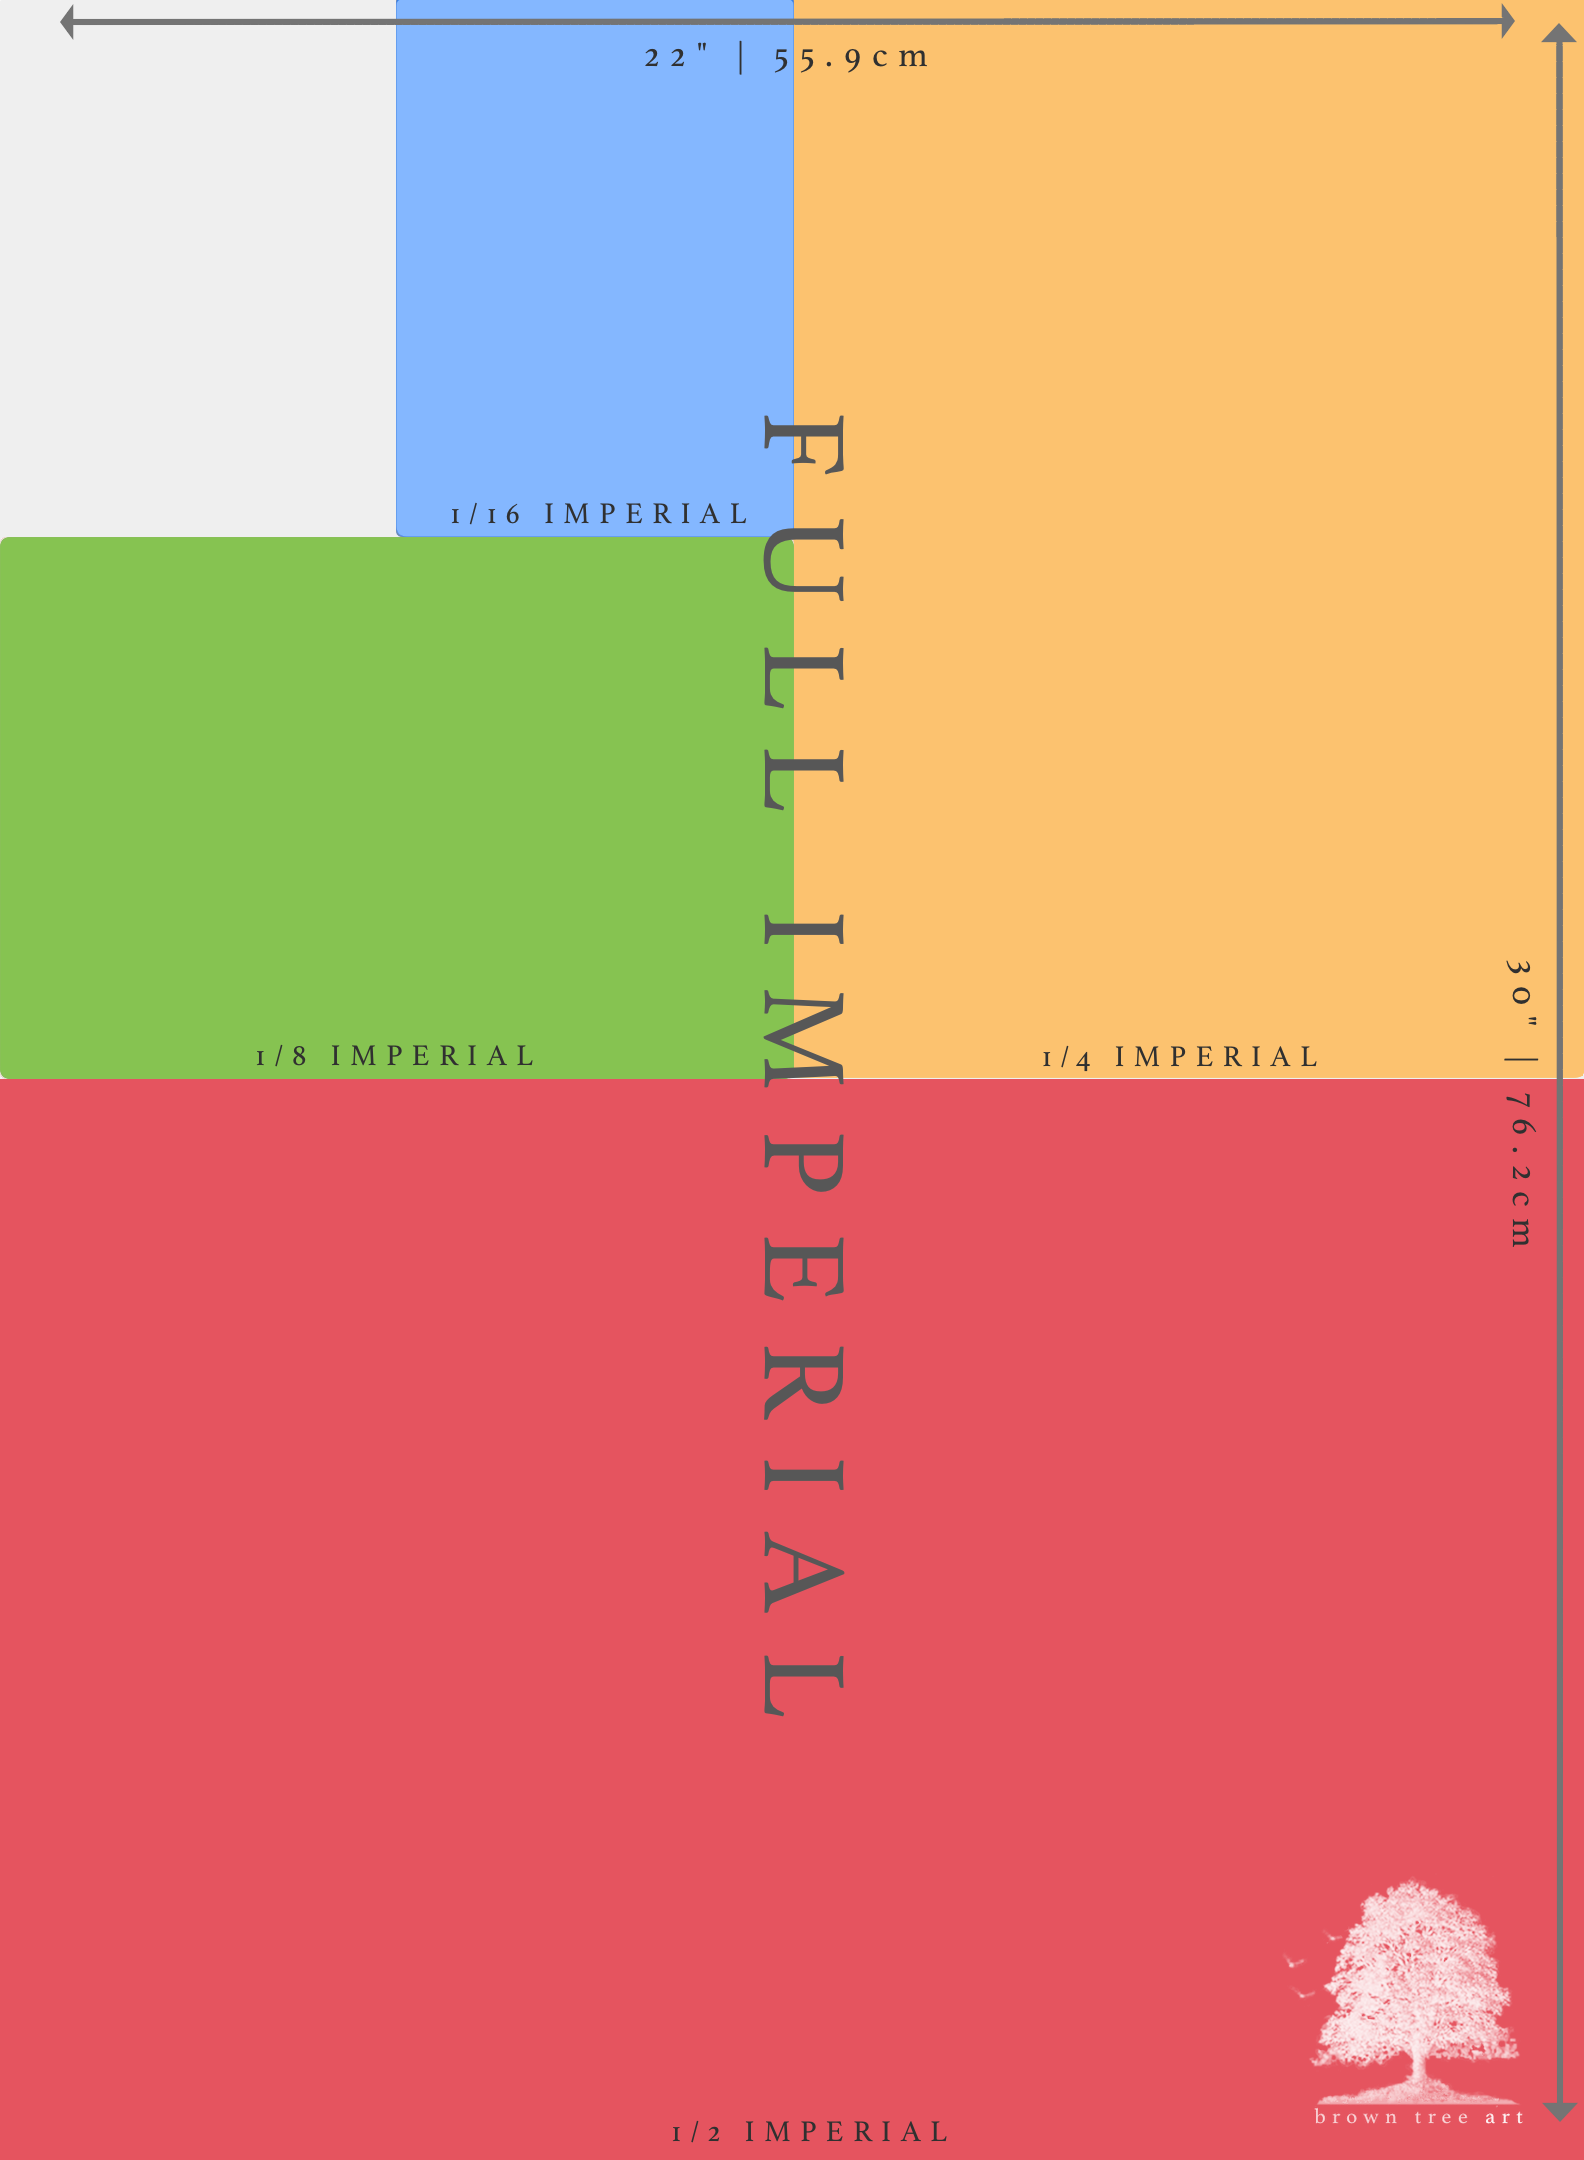 Imperial Paper Sizes Chart